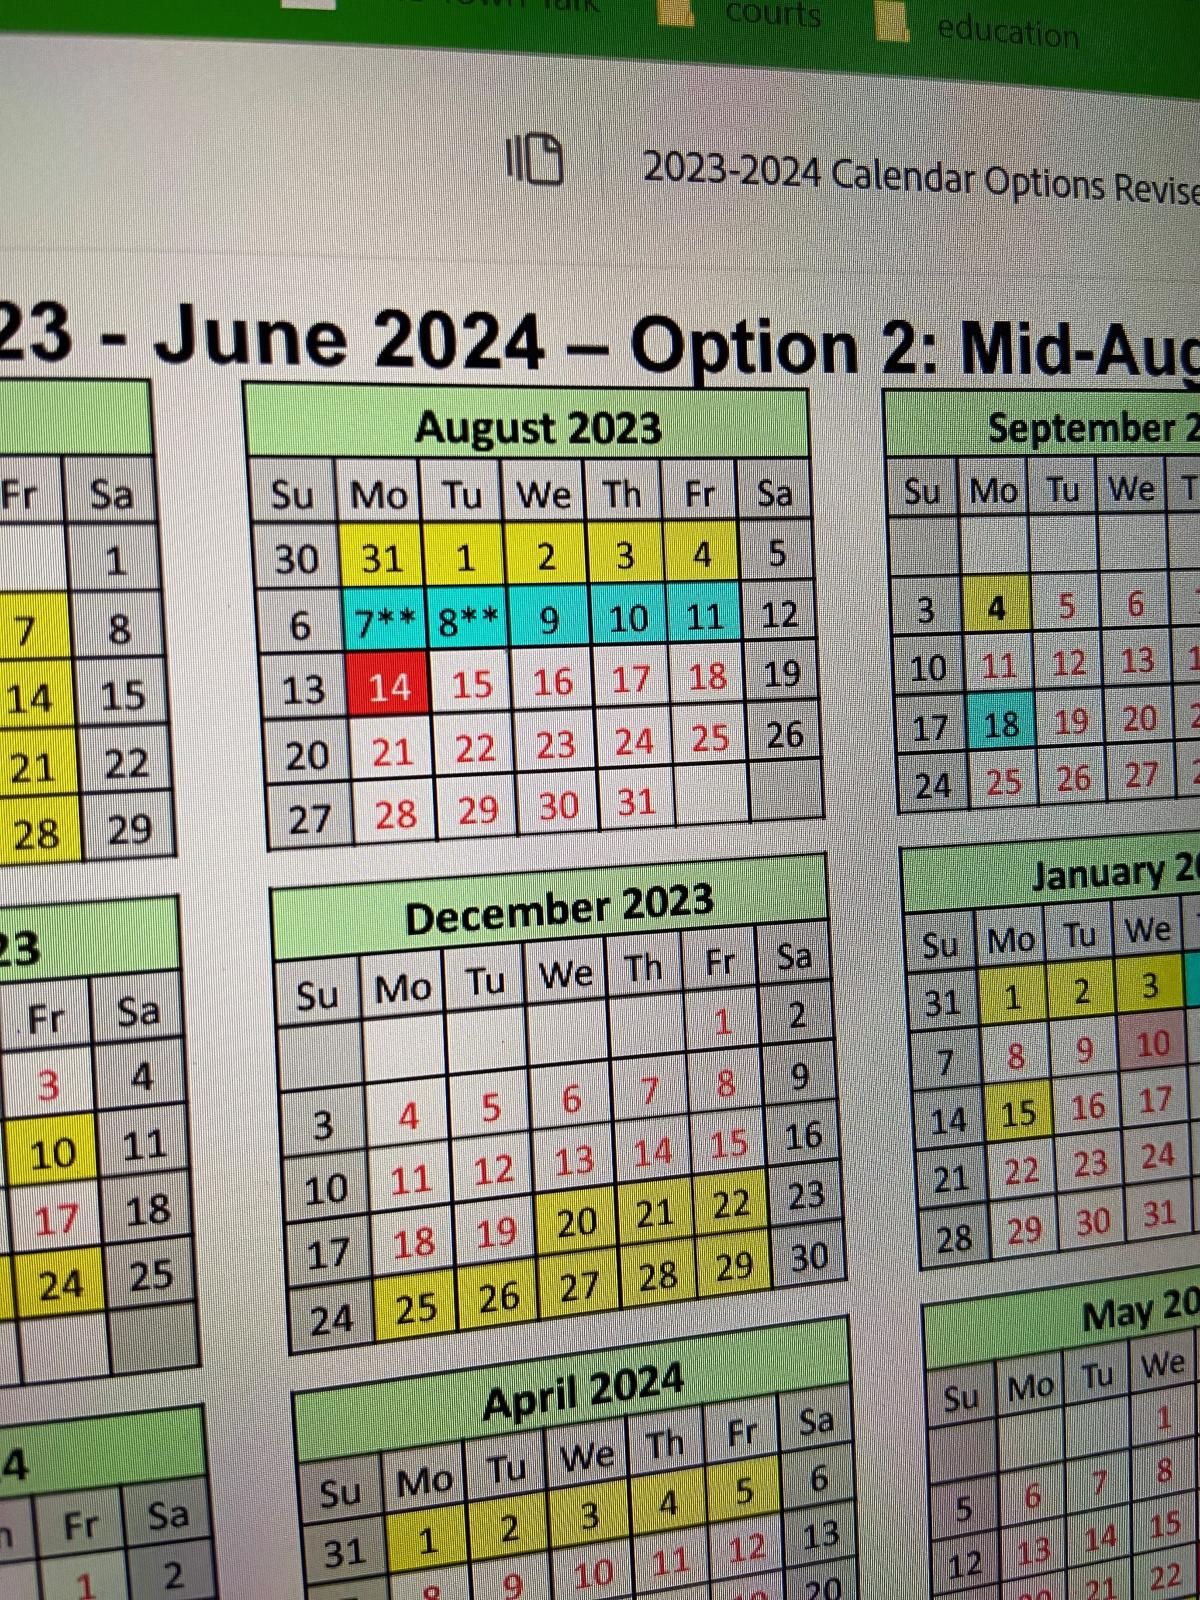 Board approves 202324 Rapides school calendar; students to return on